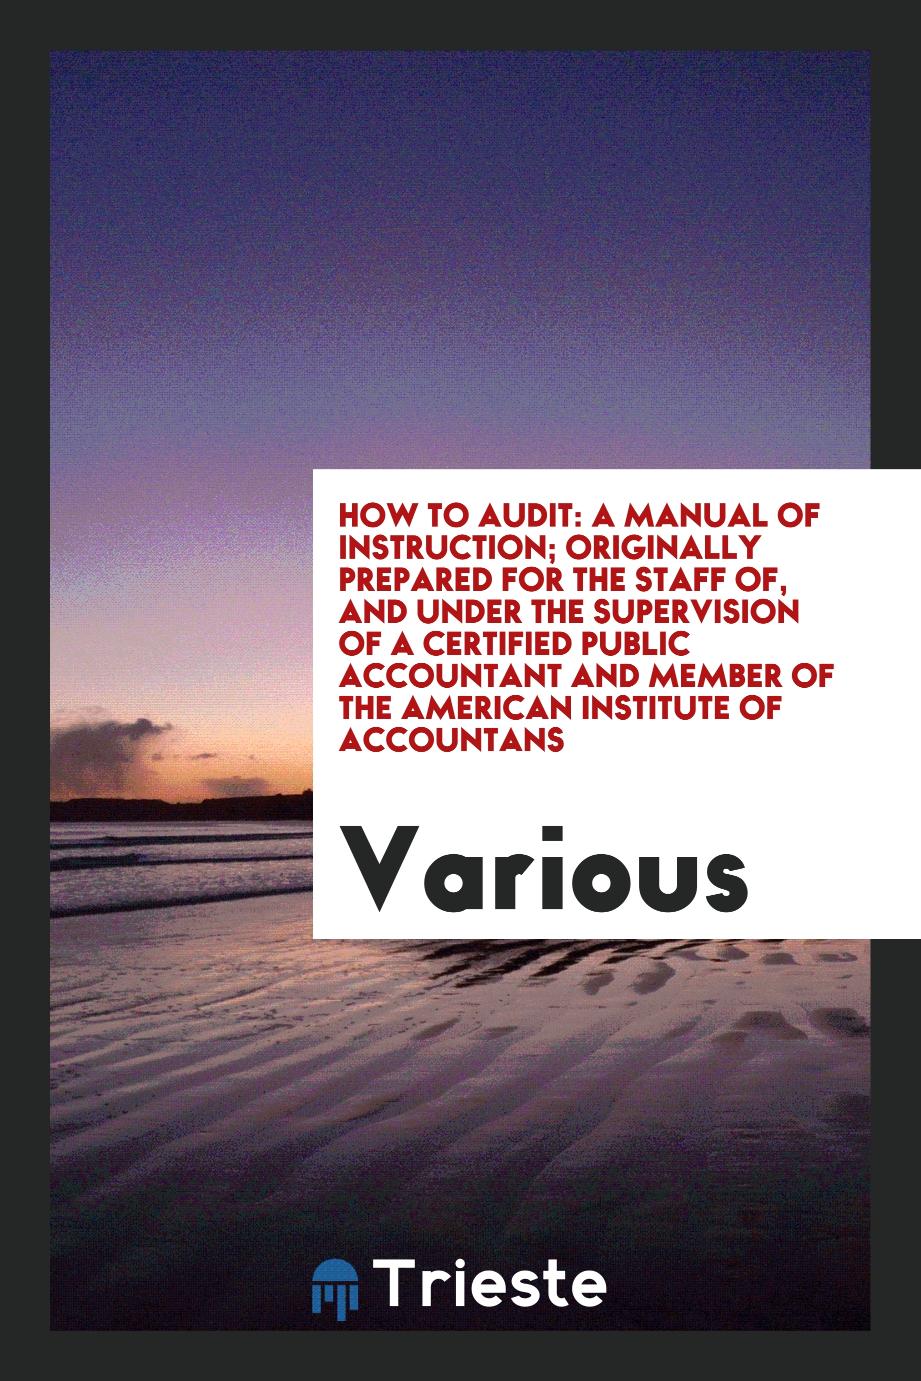 How to Audit: A Manual of Instruction; Originally Prepared for the Staff of, and Under the Supervision of a Certified Public Accountant and Member of the American Institute of Accountans